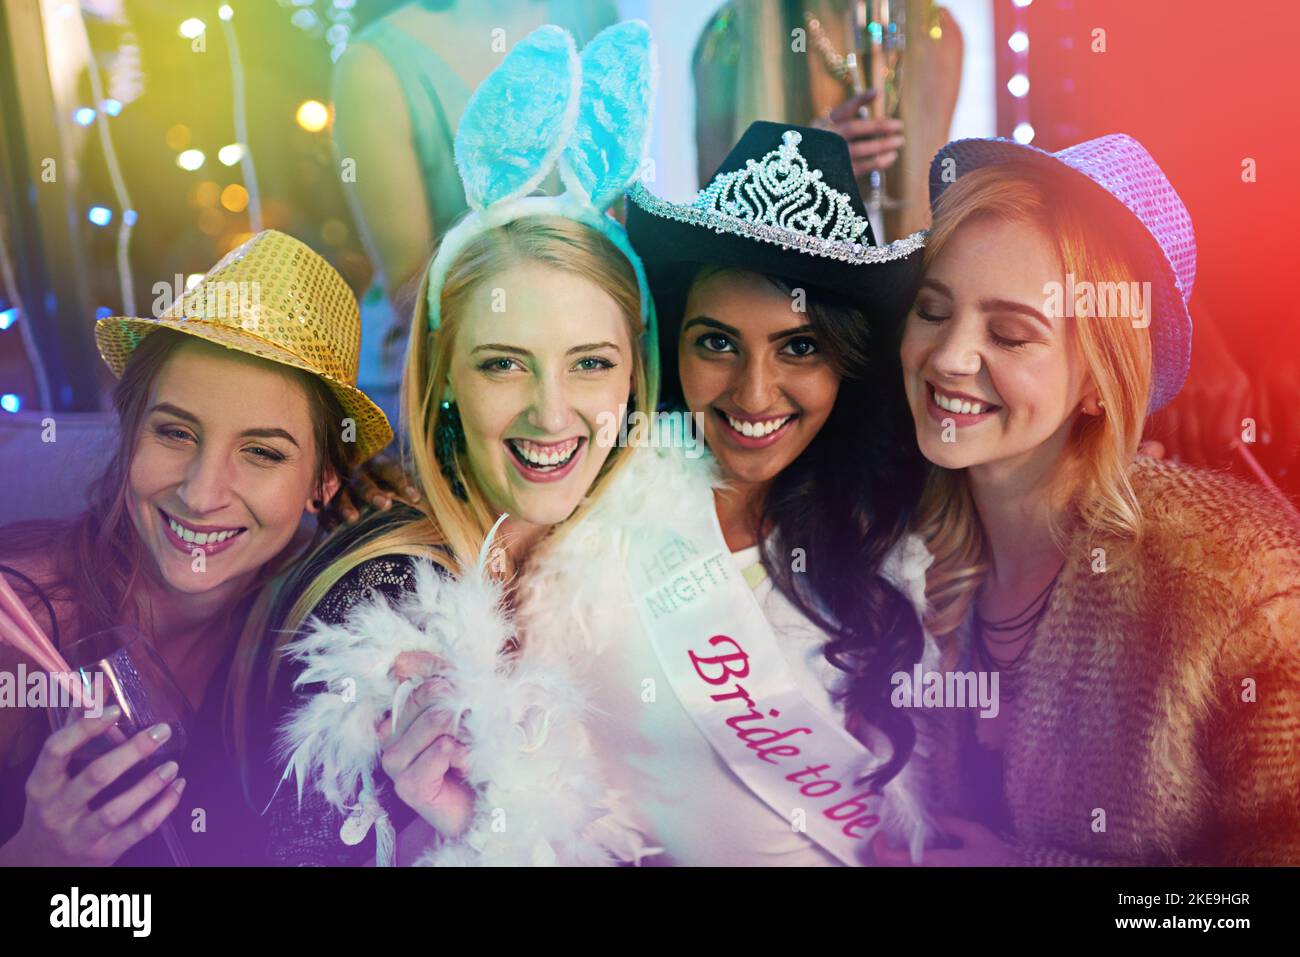 Guess whos getting married. Portrait of a group of young woman having a bachelorette party at a nightclub. Stock Photo